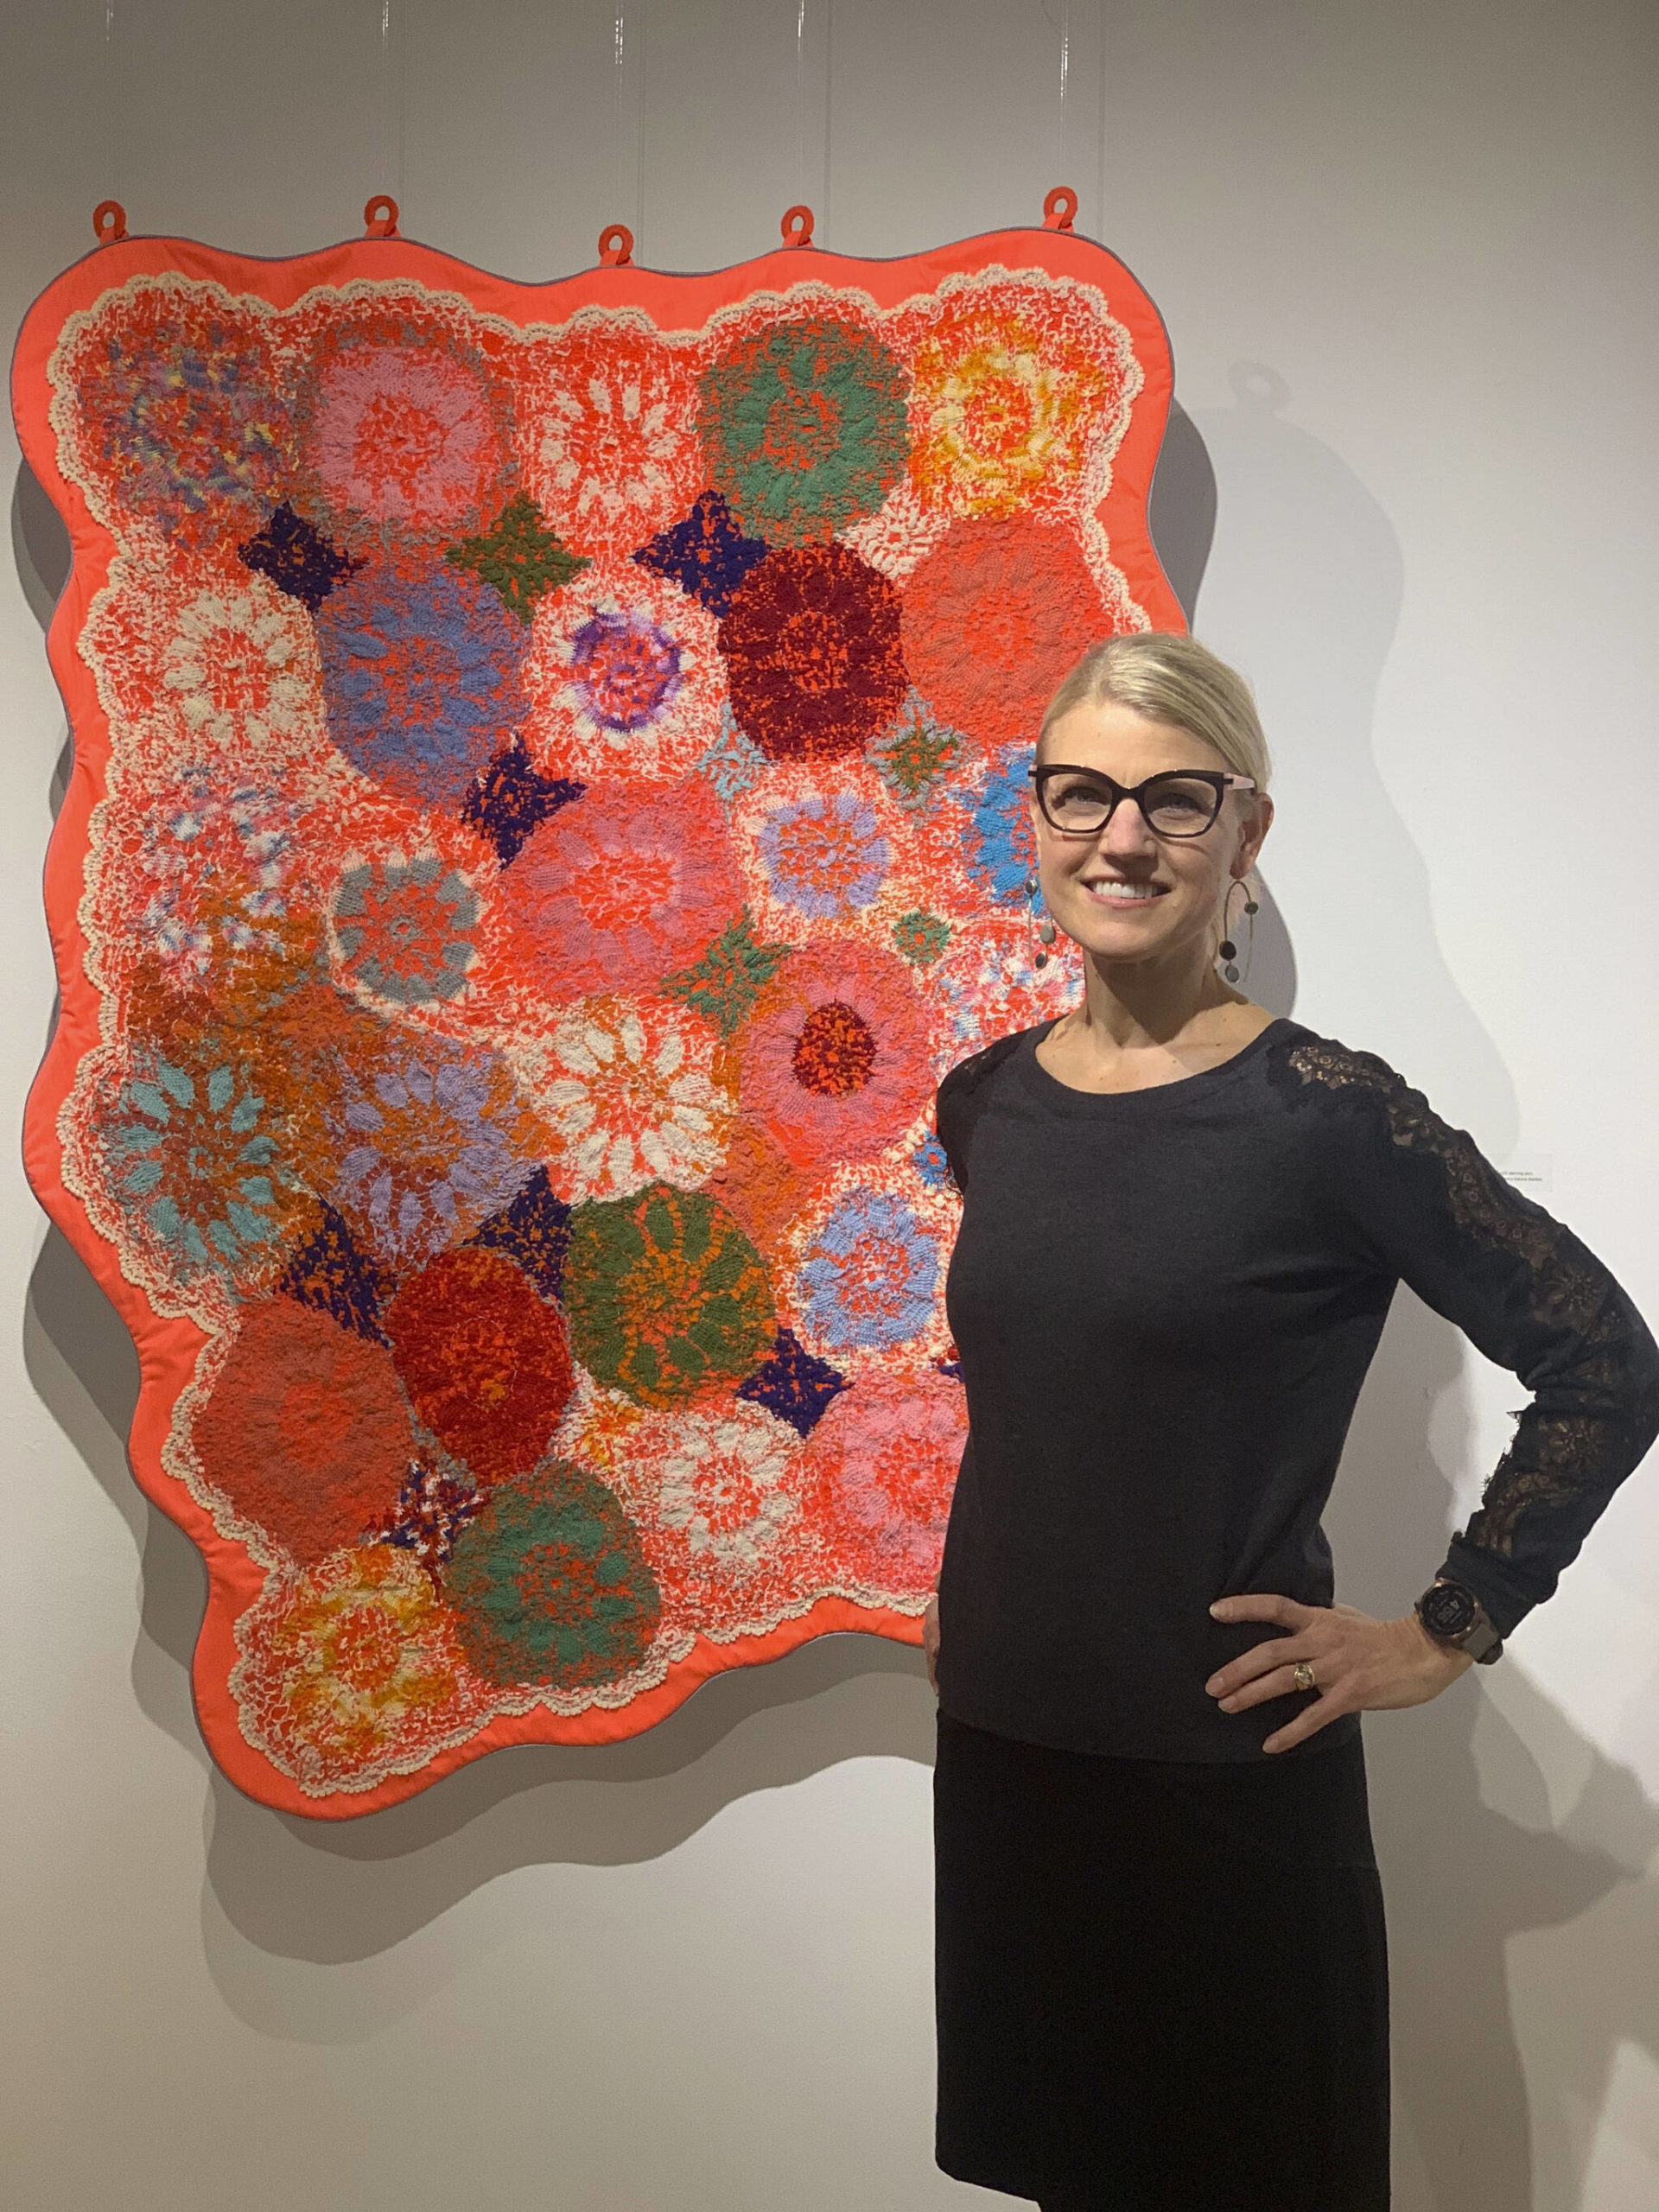 Amy Meissner poses with her work, Survival Blanket, at the opening of the Mother exhibit showing this month at Bunnell Street Arts Center. (Photo by Christina Whiting)